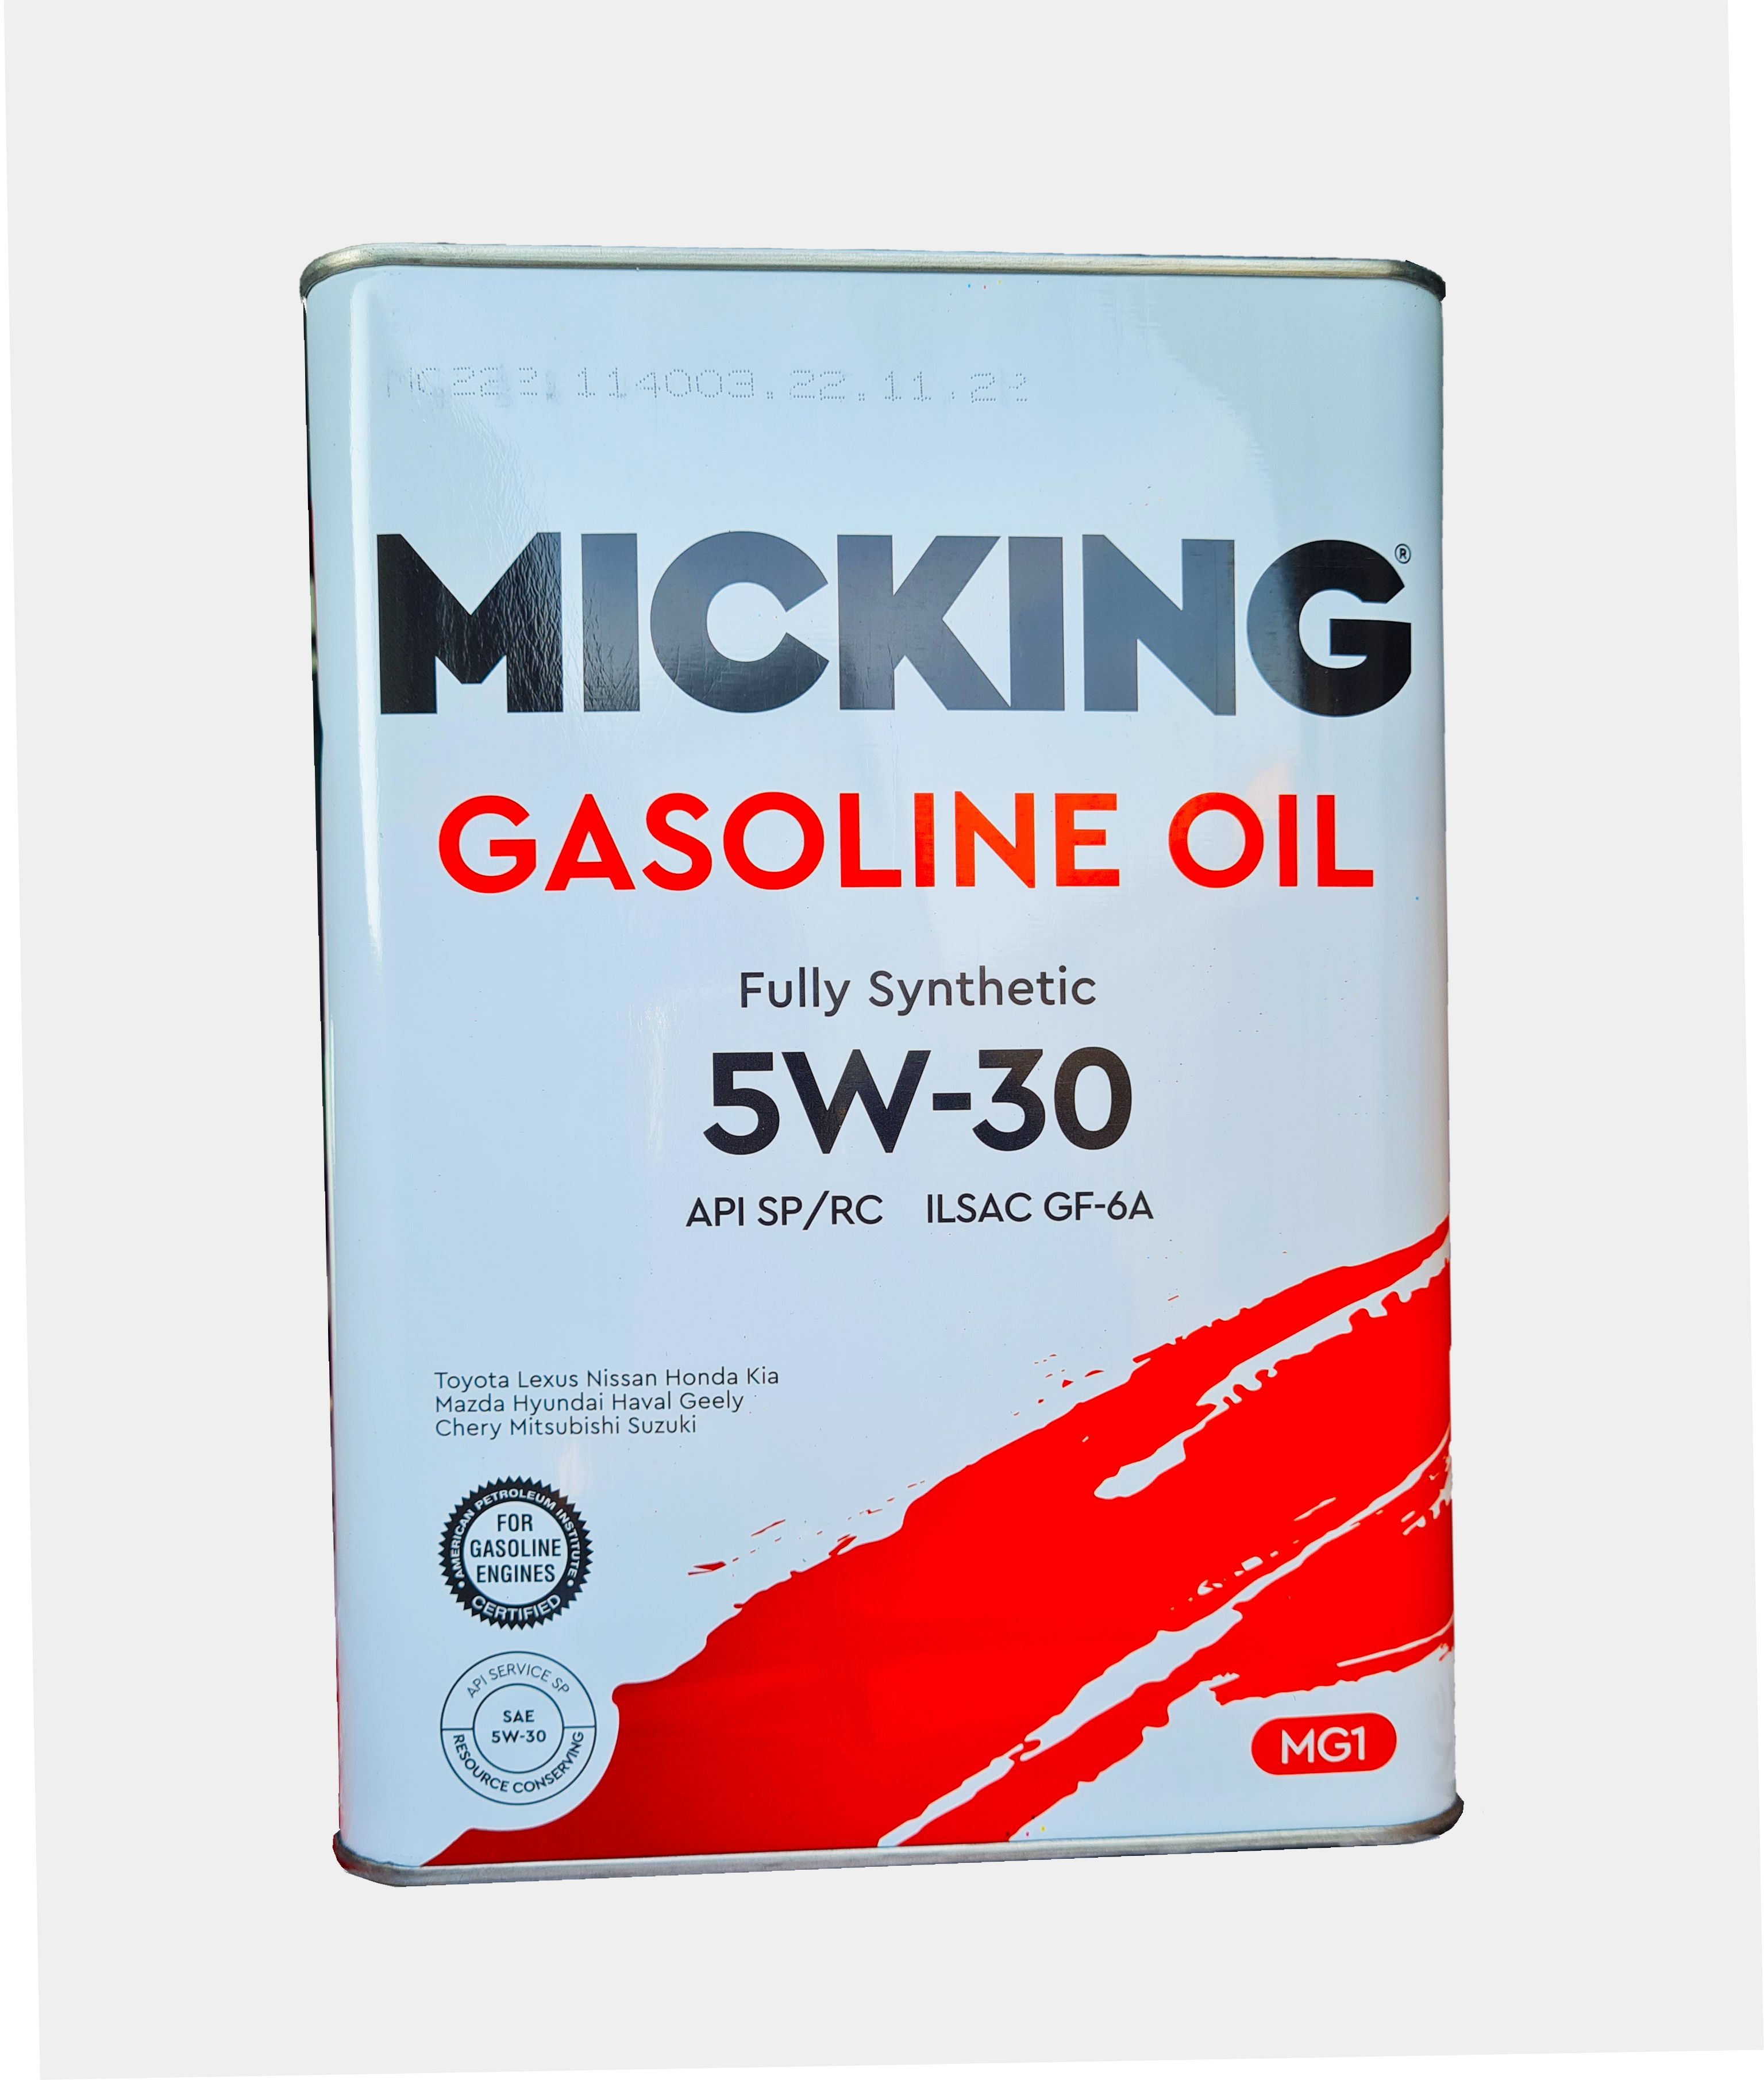 Масло micking 5w30. Масло моторное Micking gasoline fully-Synthetic 5w-30 синтетическое 4 л. Micking 5w30 моторное масло. Моторное масло TCL 0w20.